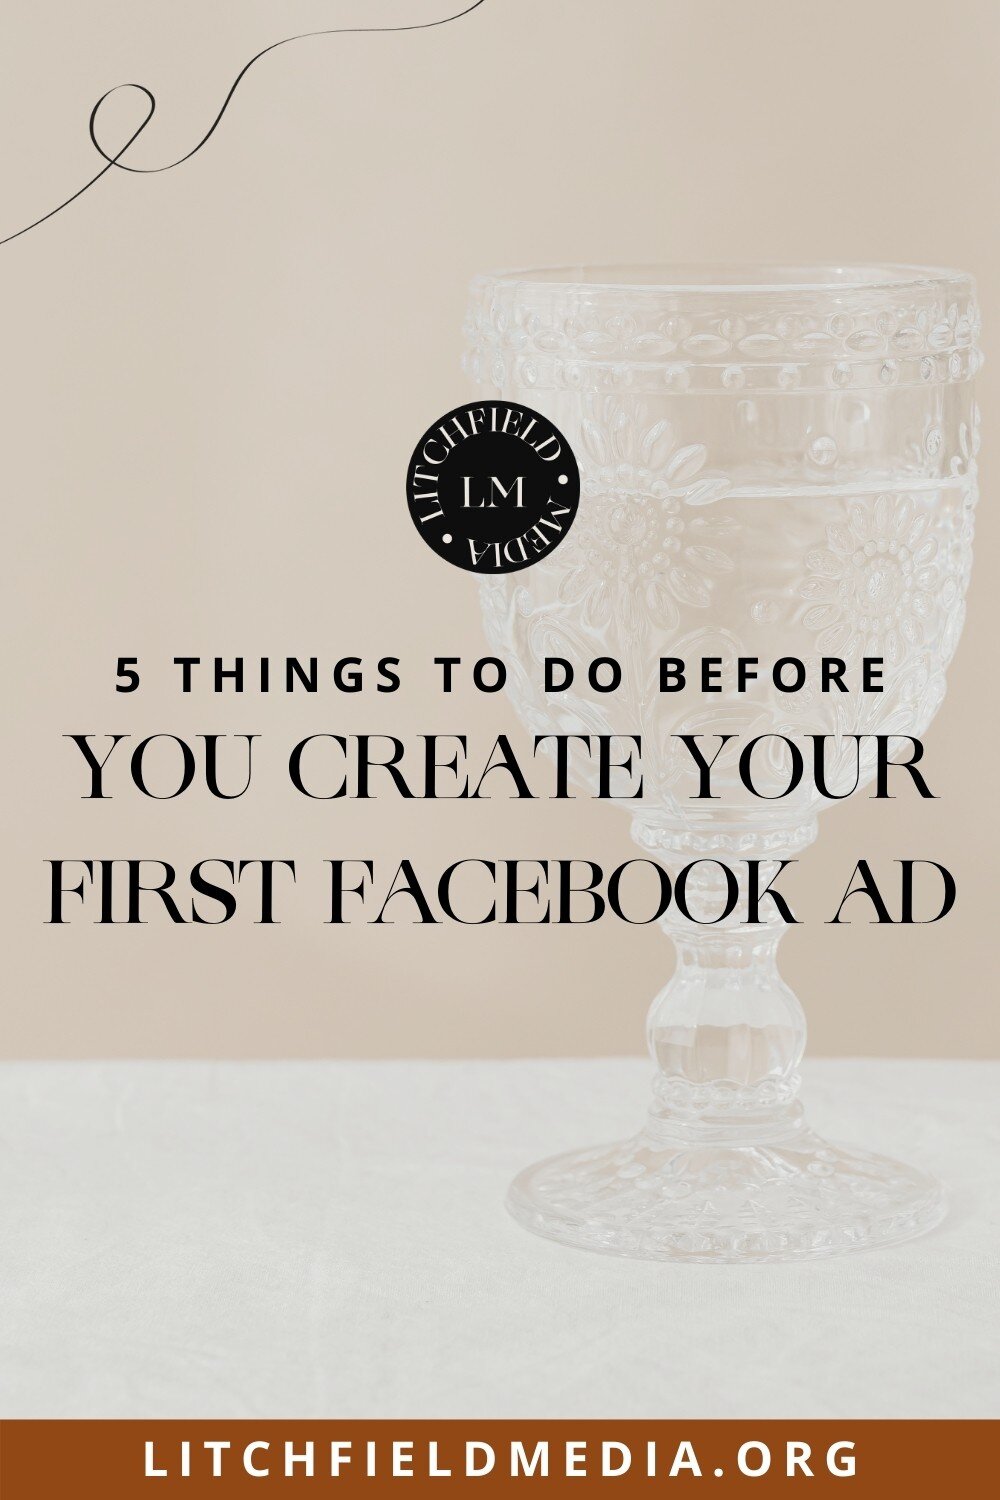 Litchfield Media Blog Create your first Facebook ad campaign.jpg